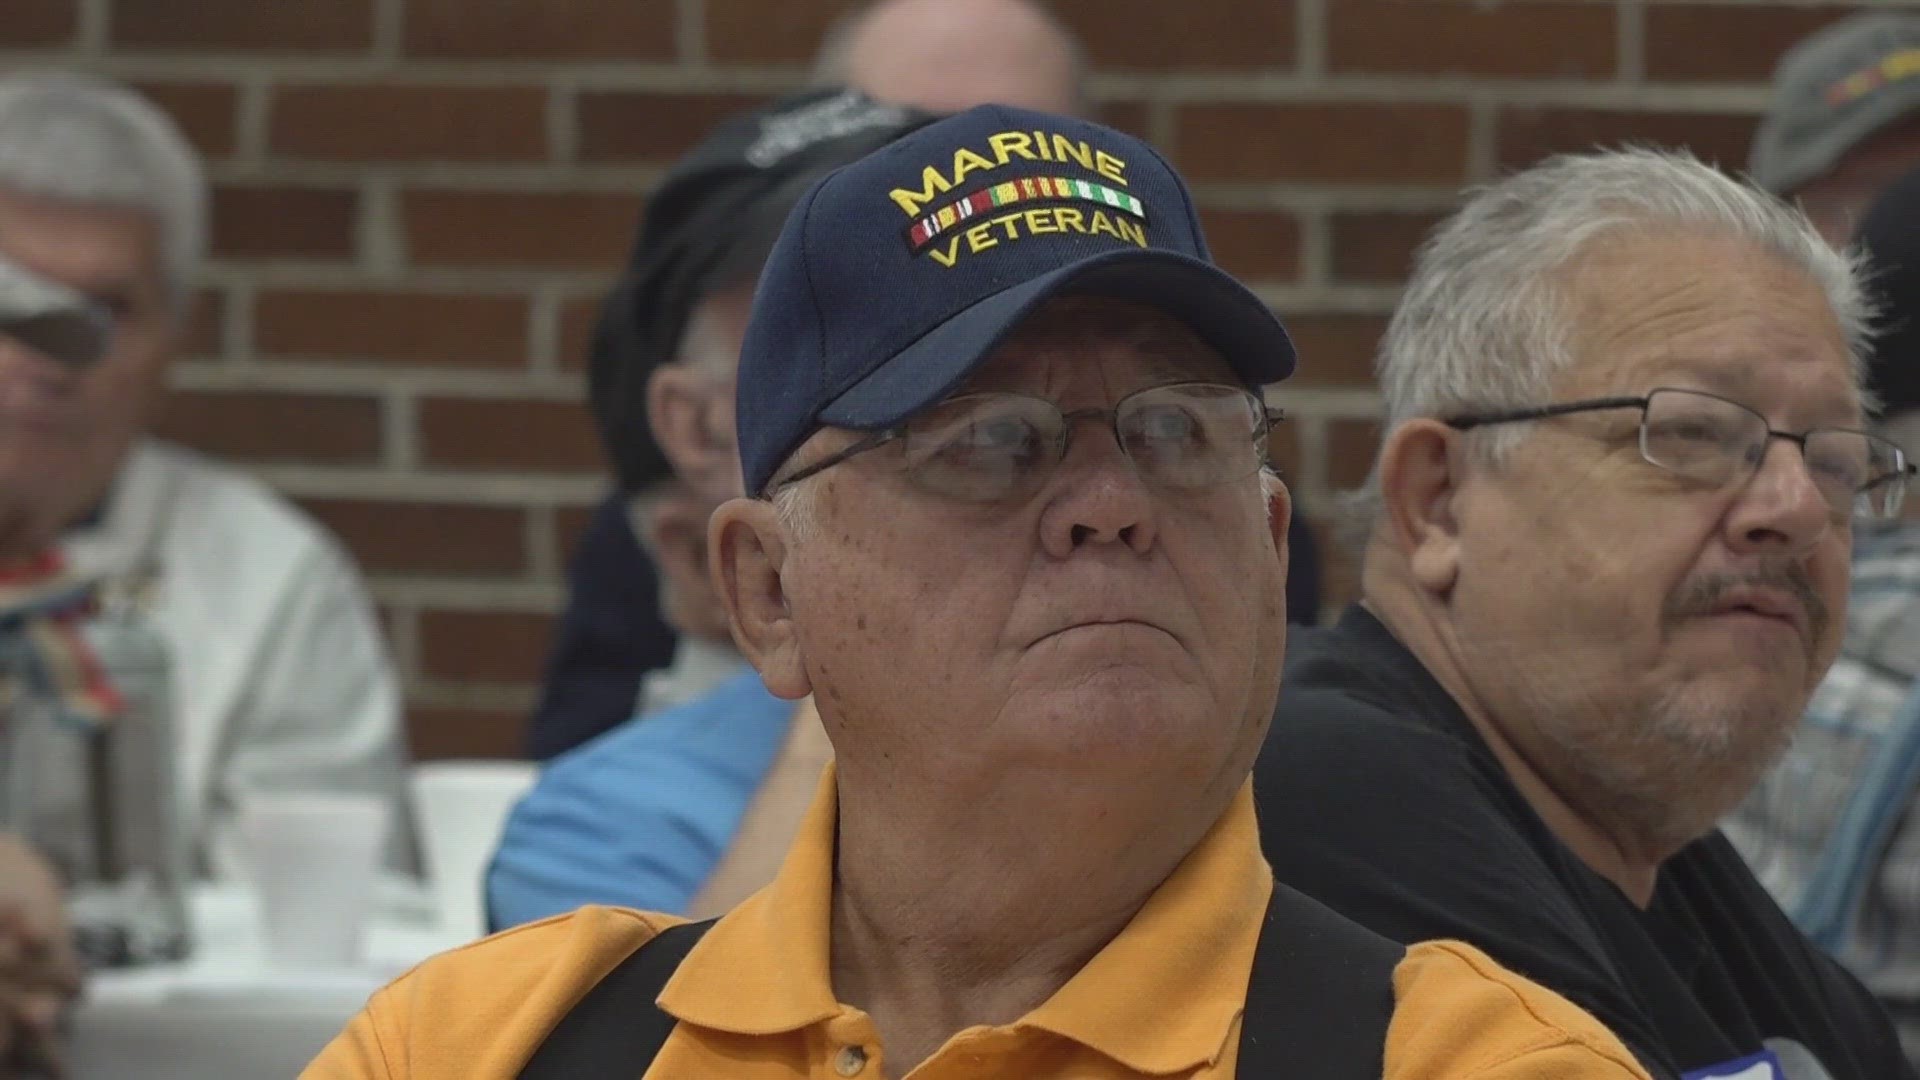 Anderson County recognizes its veterans with a monthly breakfast. This time two of their war heroes share words of wisdom alongside their concern about this country.